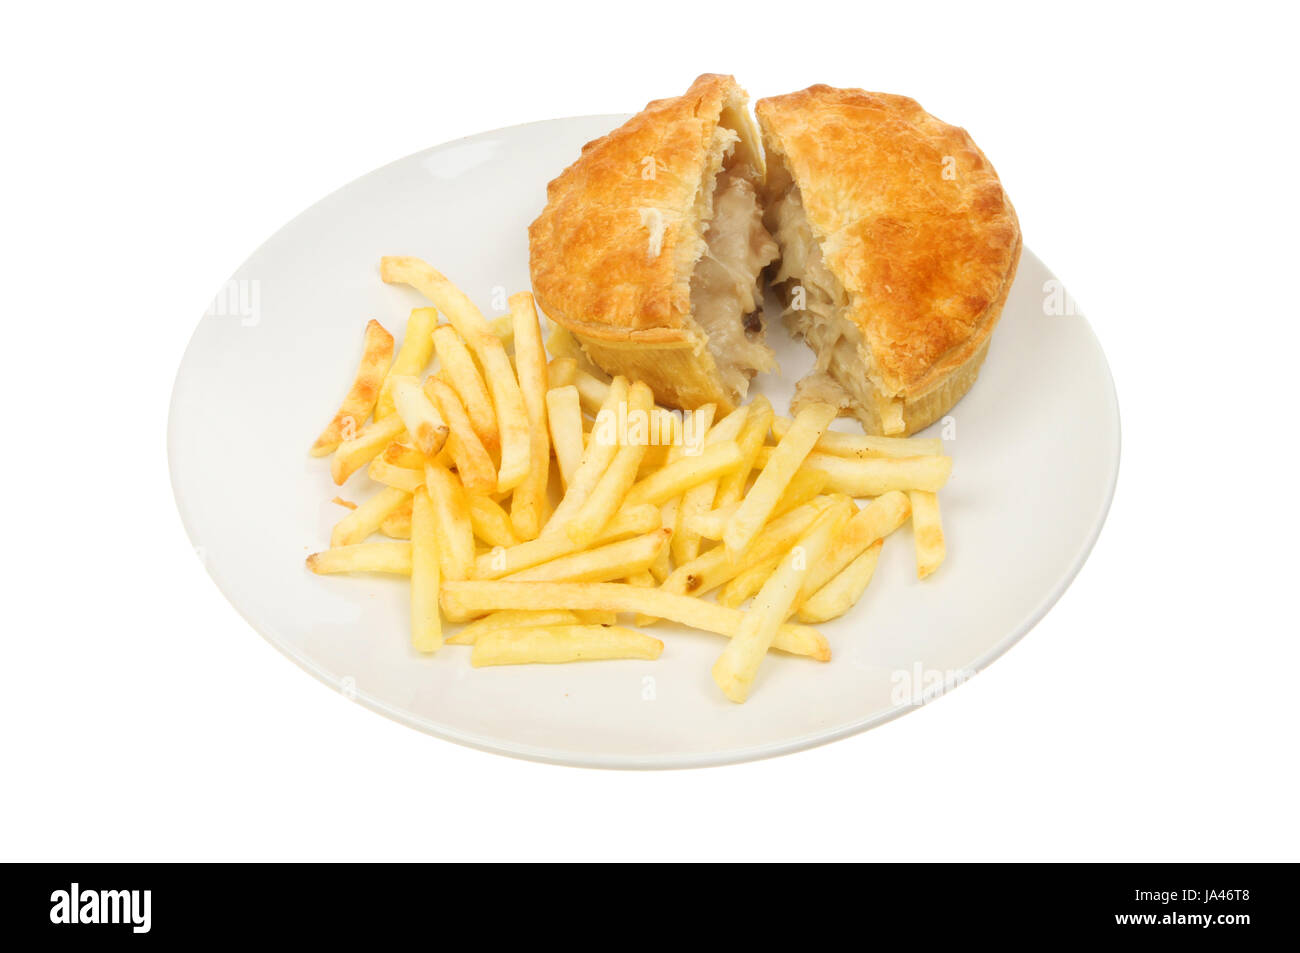 Chicken pie and French fries on a plate isolated against white Stock Photo